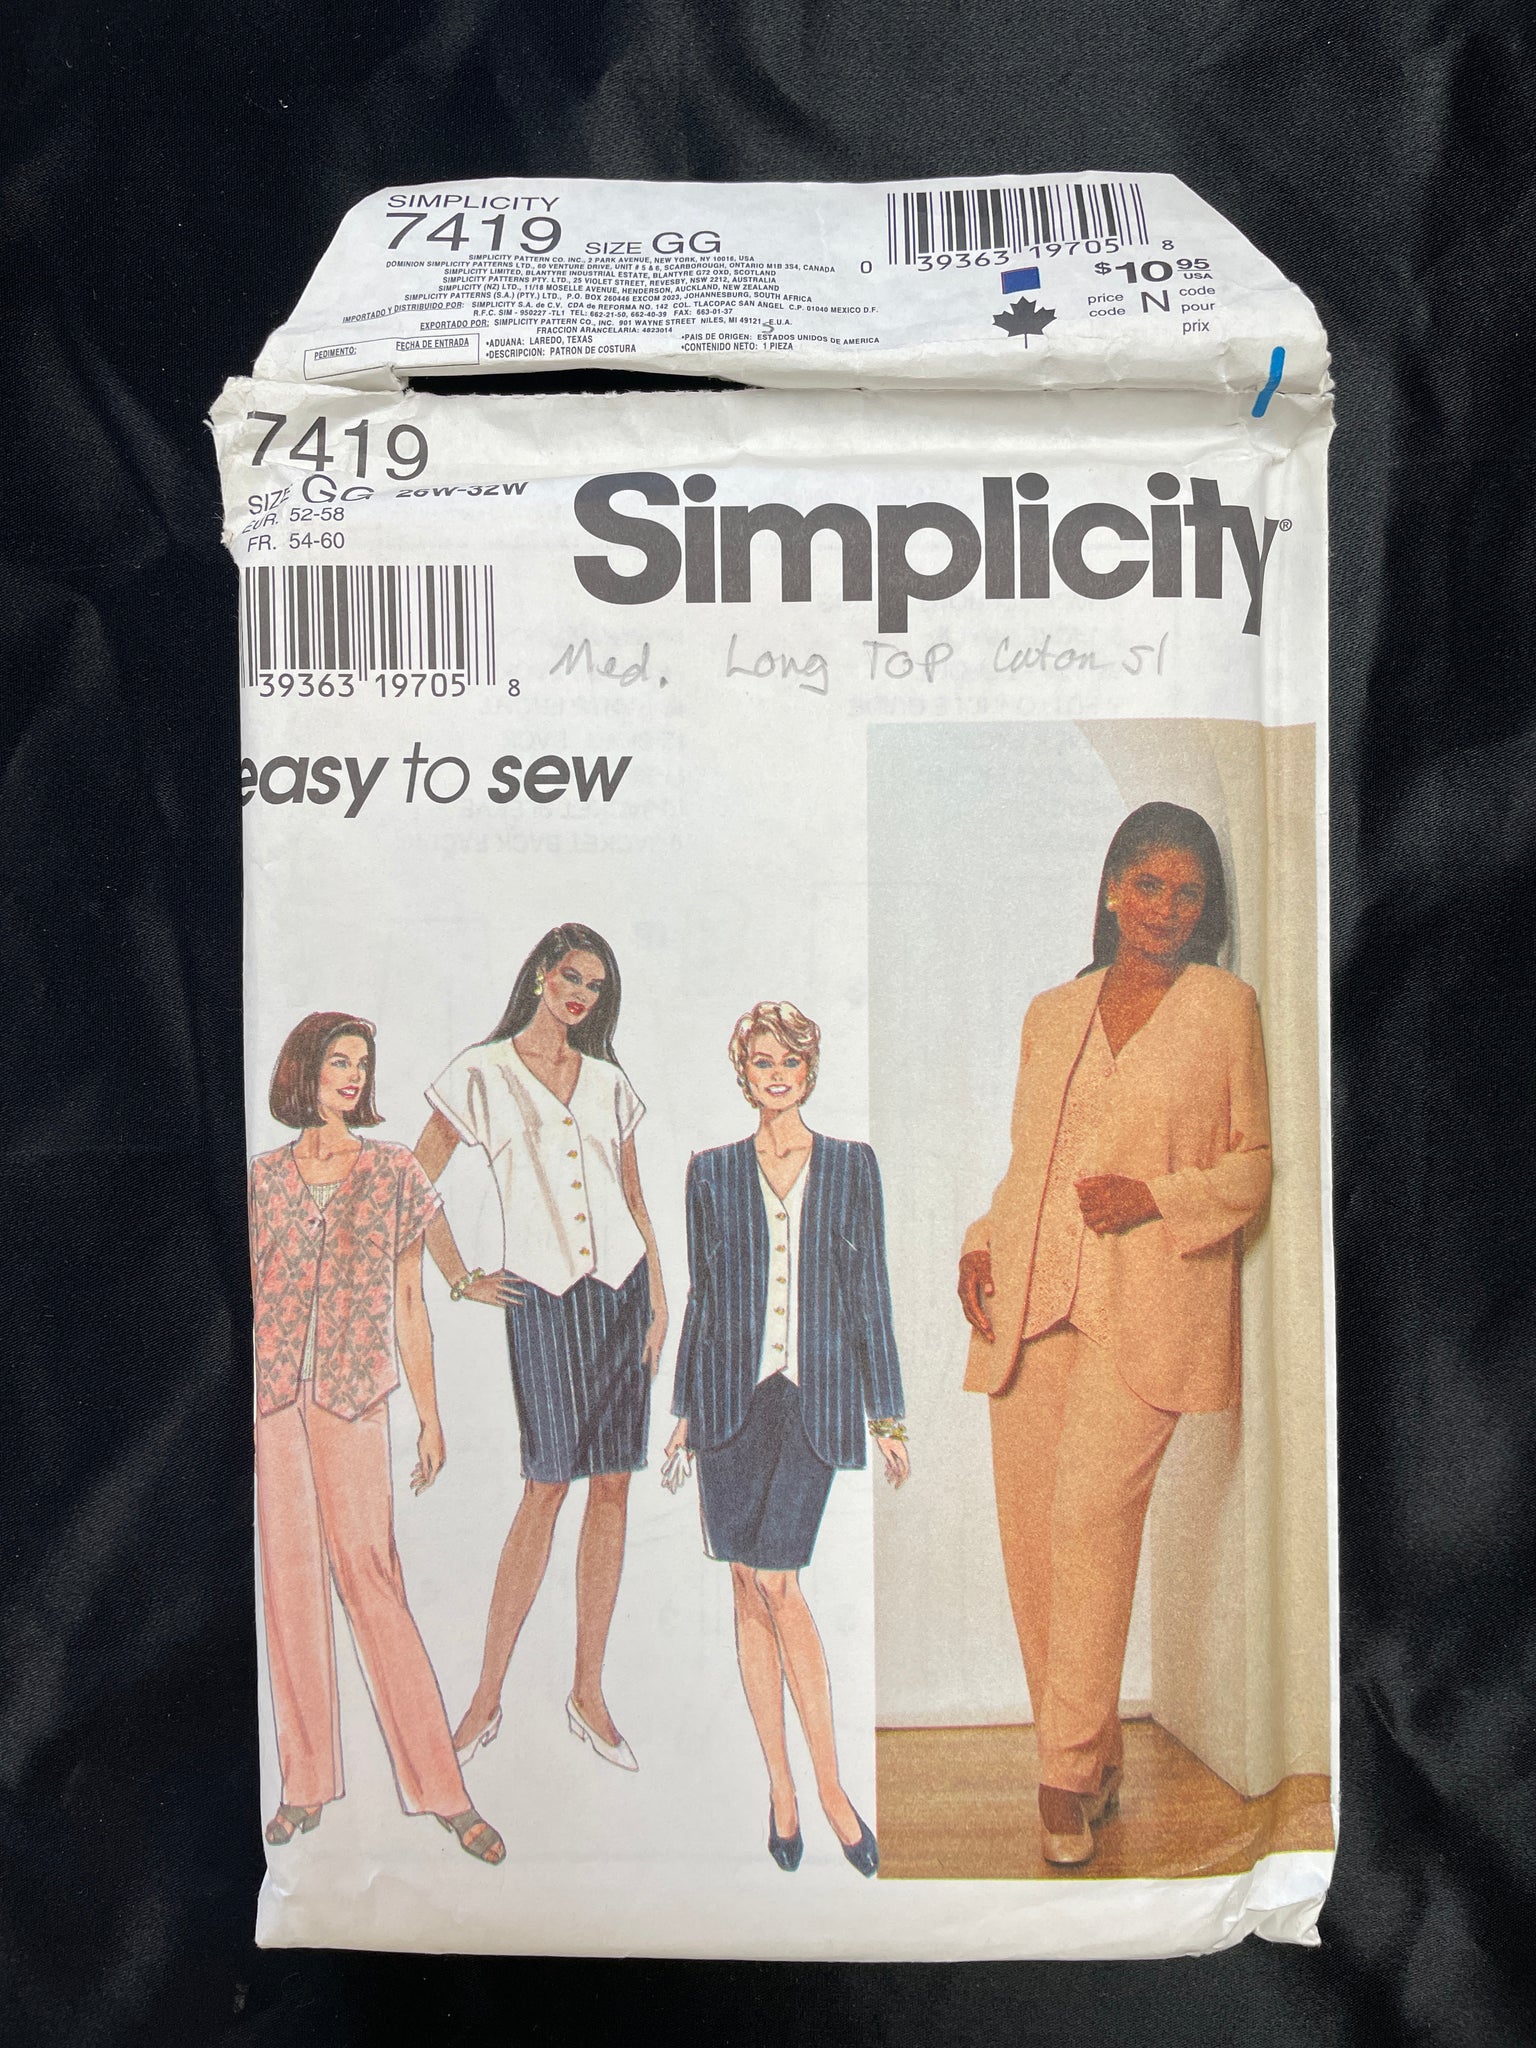 1996 Simplicity 7419 Pattern - Jacket, Blouse, Pants and Skirt FACTORY FOLDED